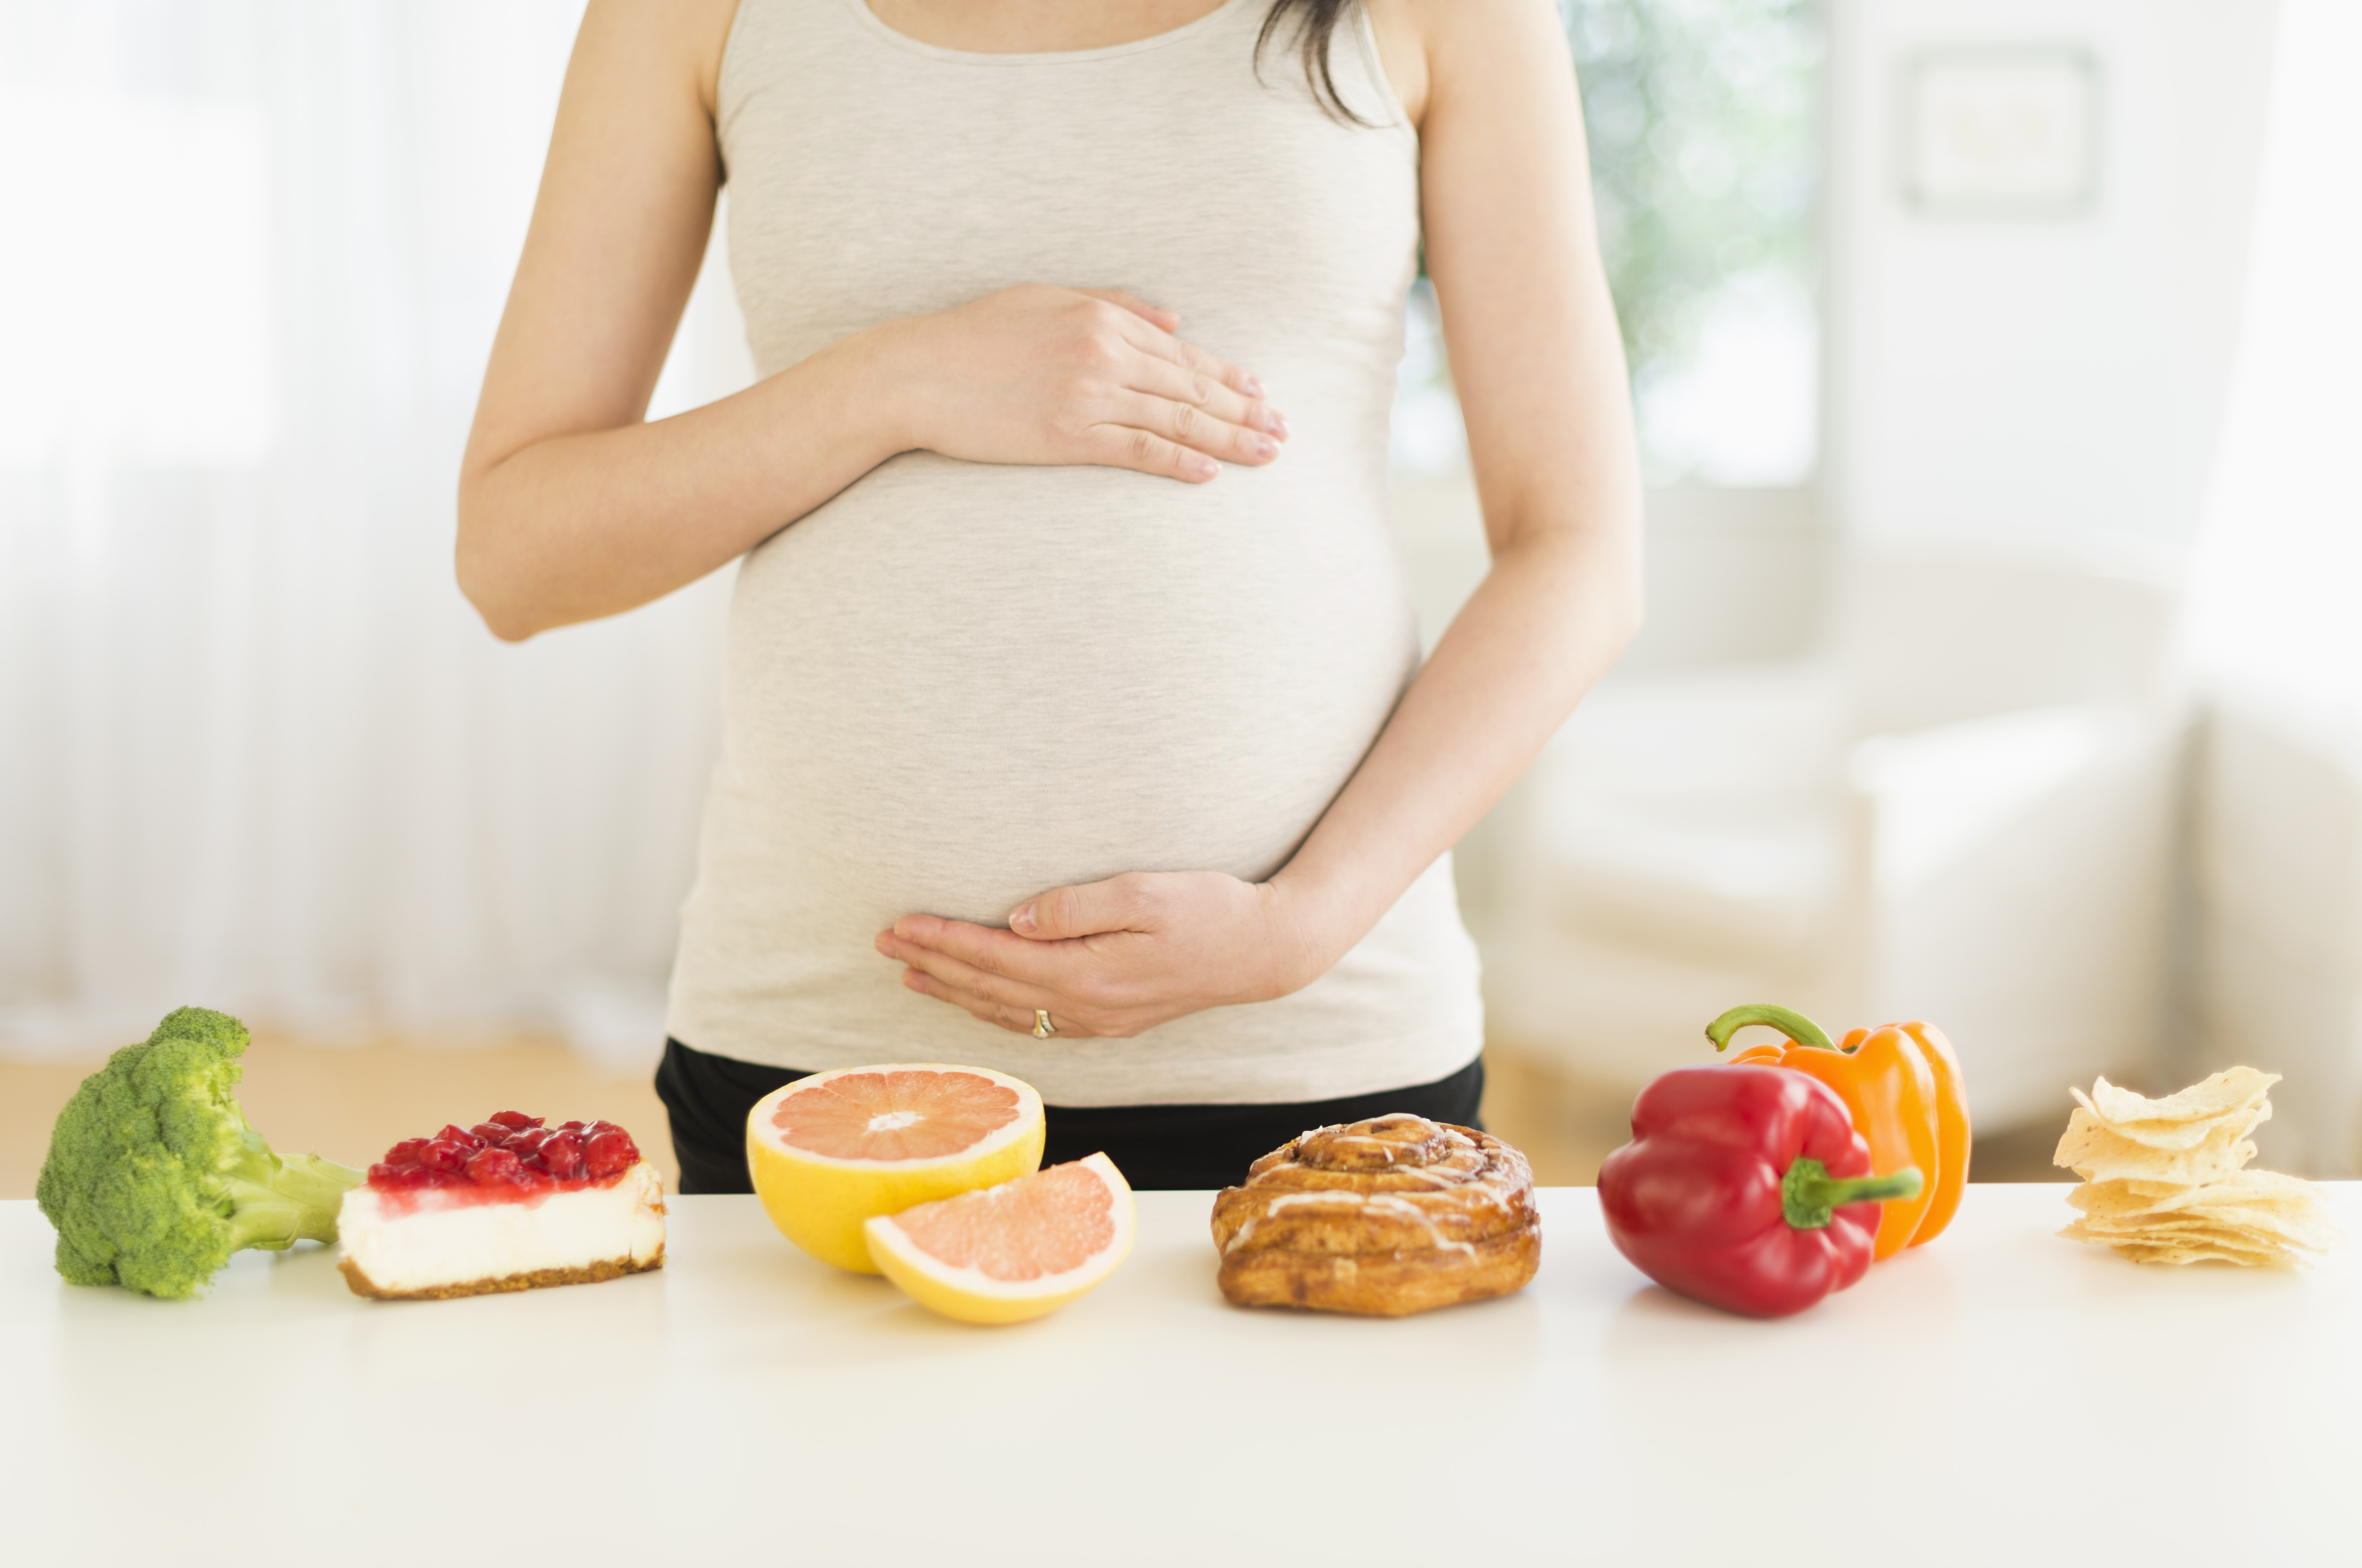 how can i diet during pregnancy